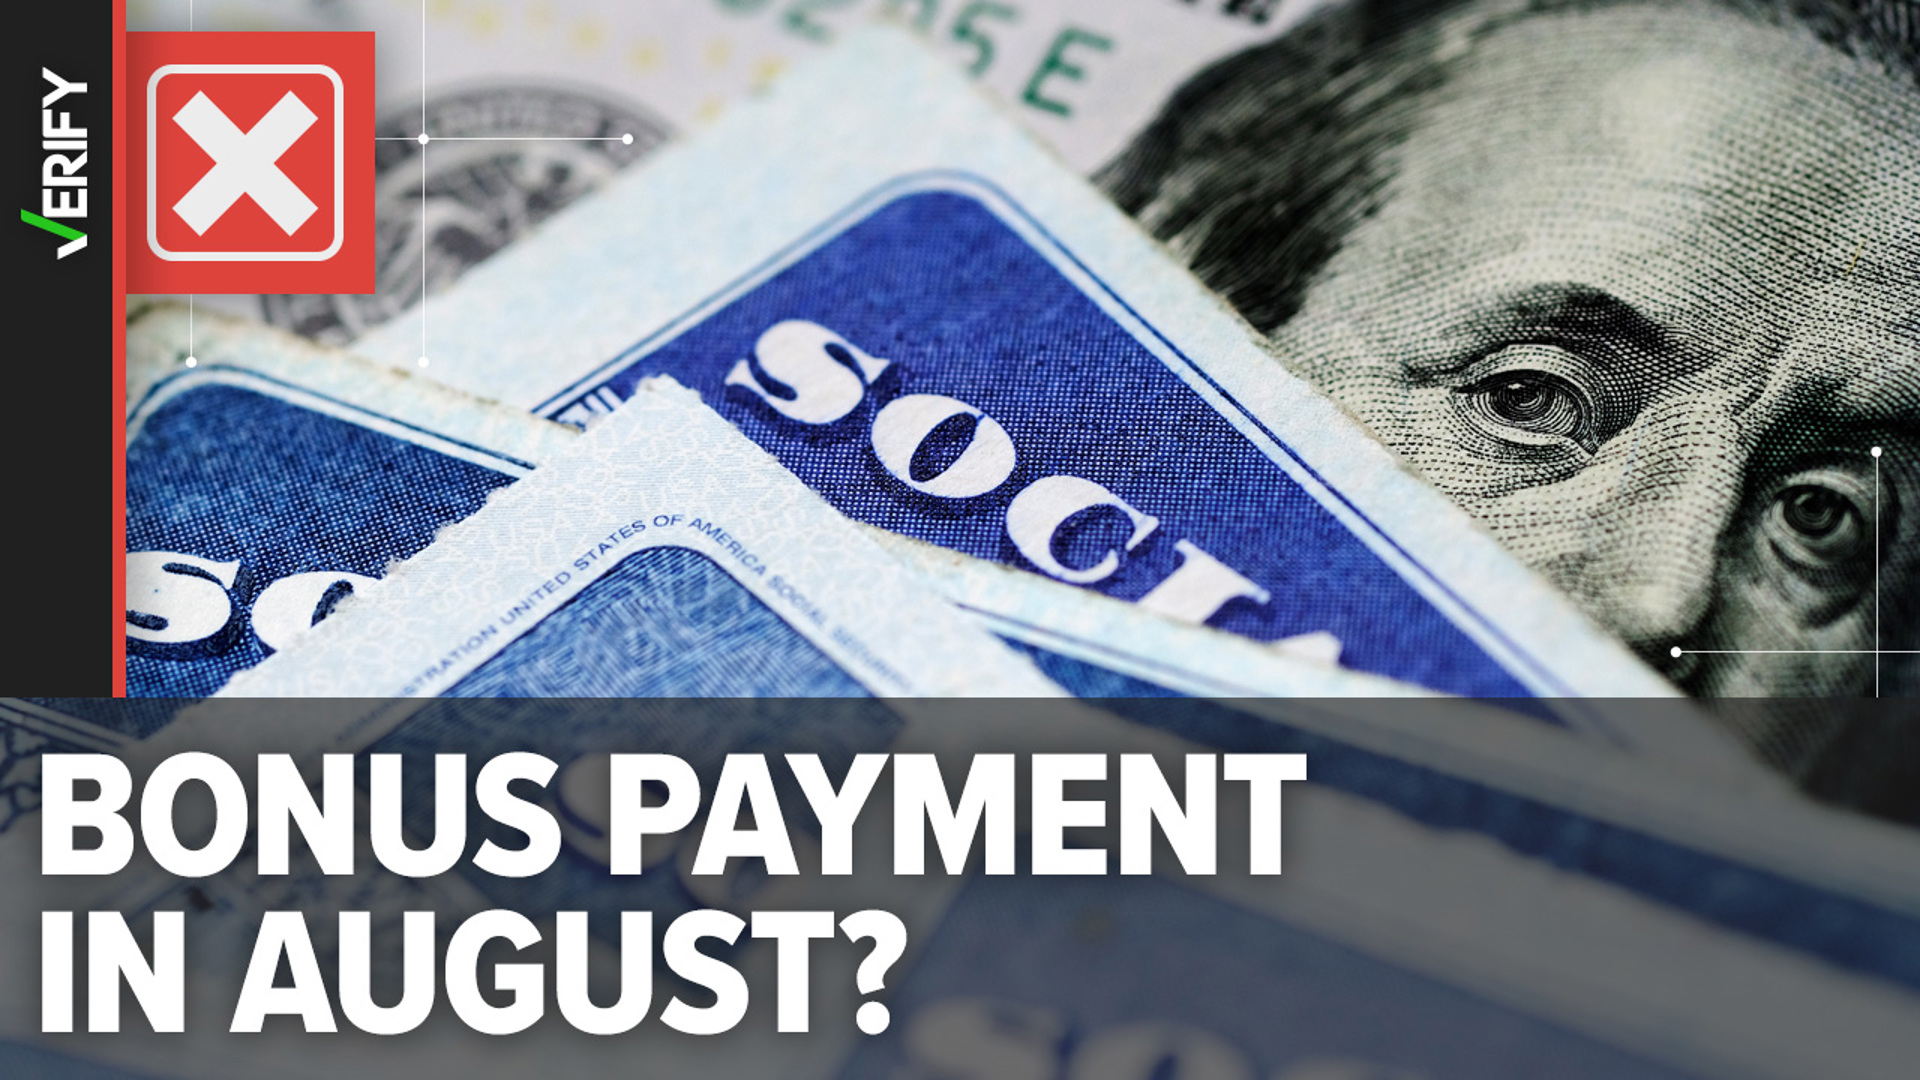 Supplemental Security Income recipients will get a second payment in August. But it’s an advance for September – not a bonus payment.